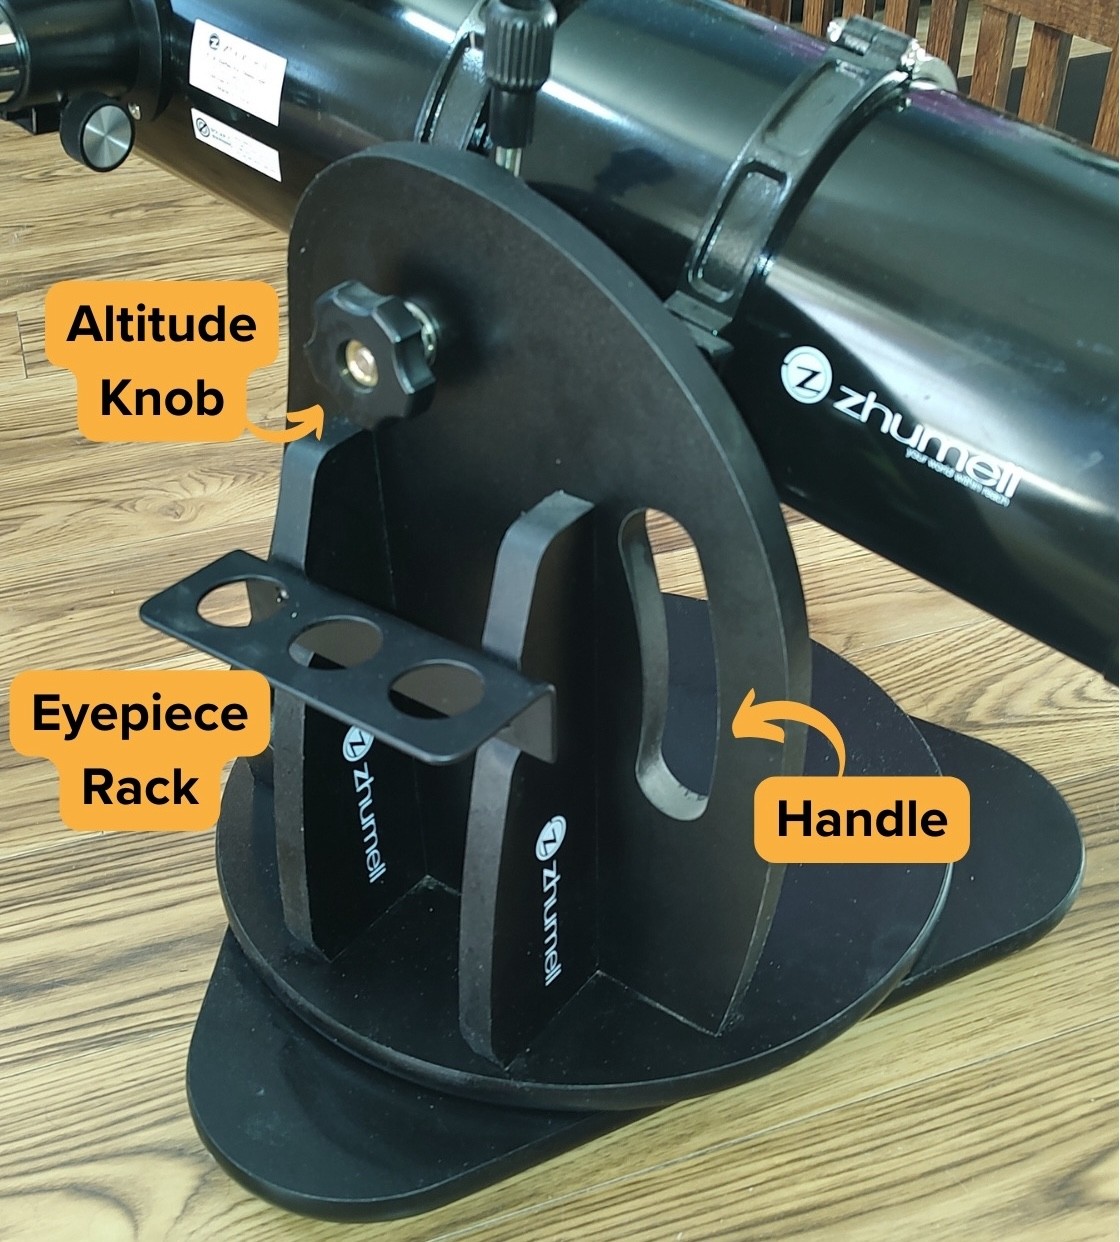 Eyepiece rack, handle and altitude tensioning knob of Z130's tabletop dobsonian mount